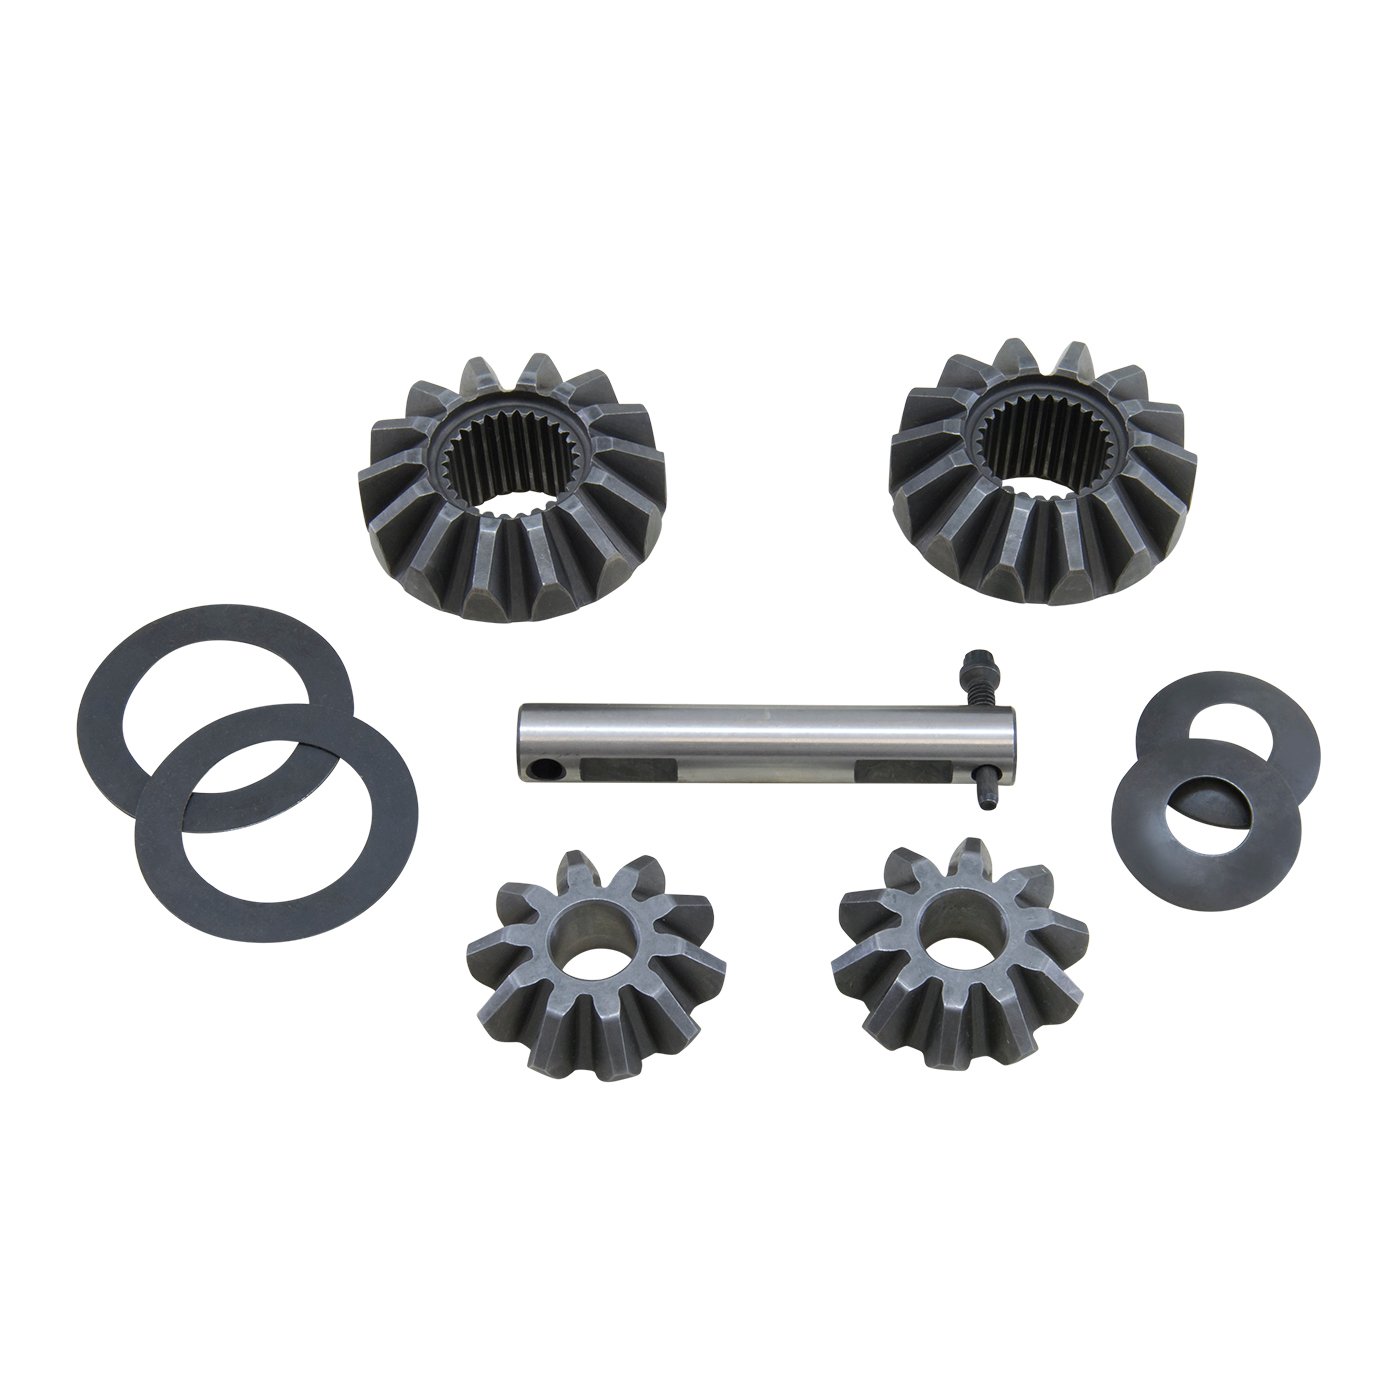 USA Standard Open Spider Gear Set AMC Model 35 With Open Differential